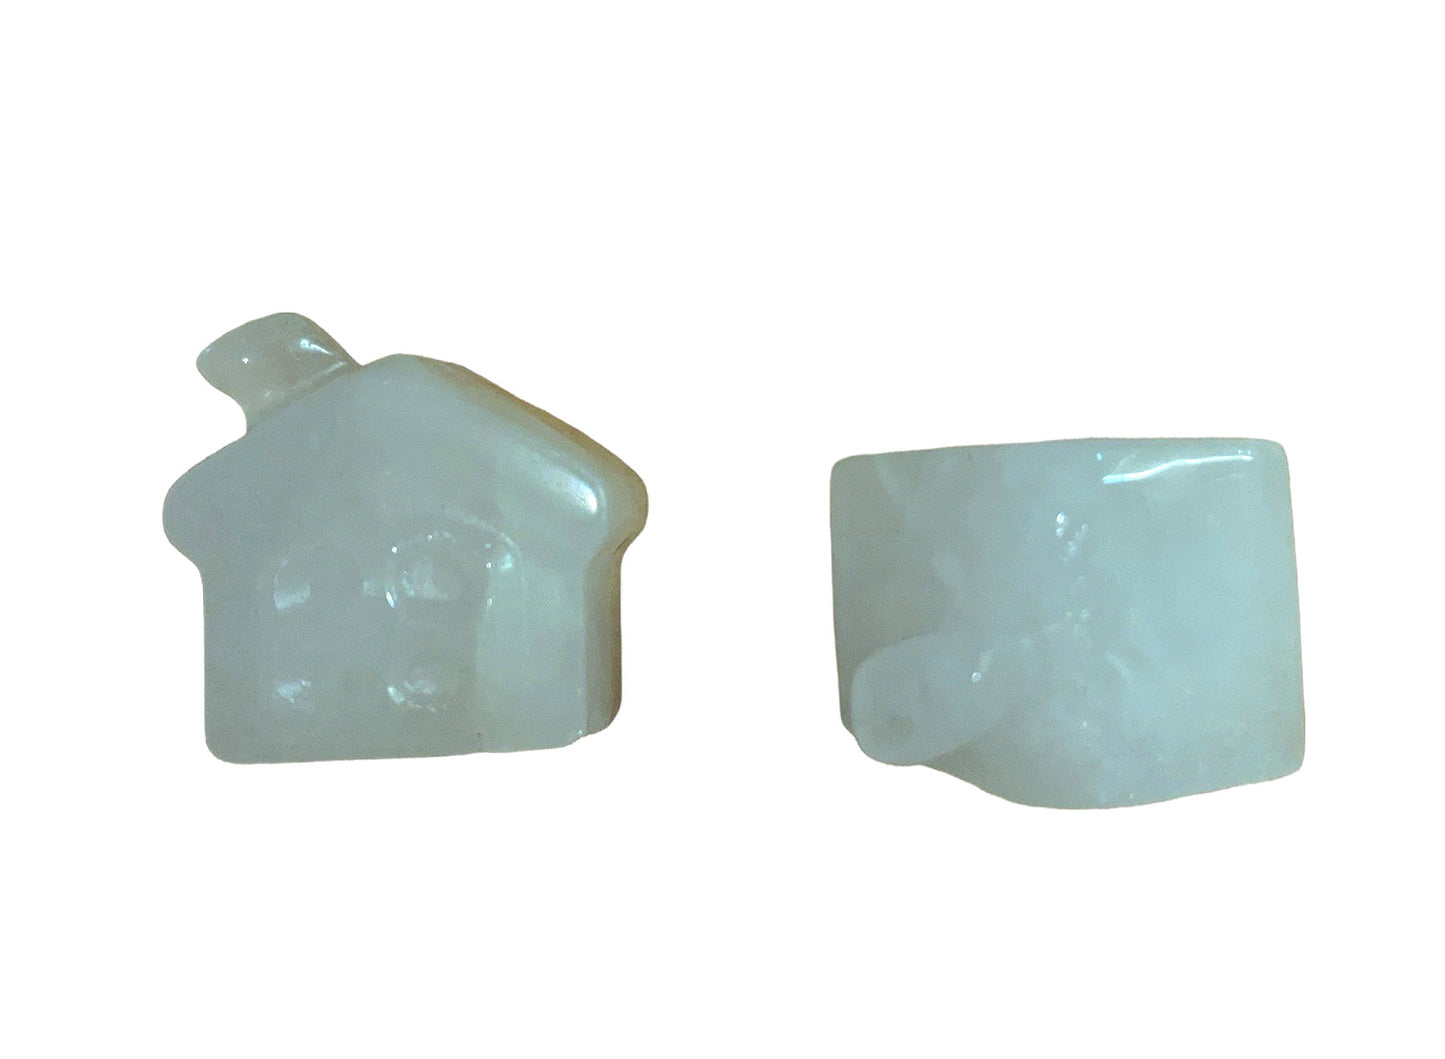 CLEAR QUARTZ Small Square House - 1 inch 25mm - Price Each - China - NEW922